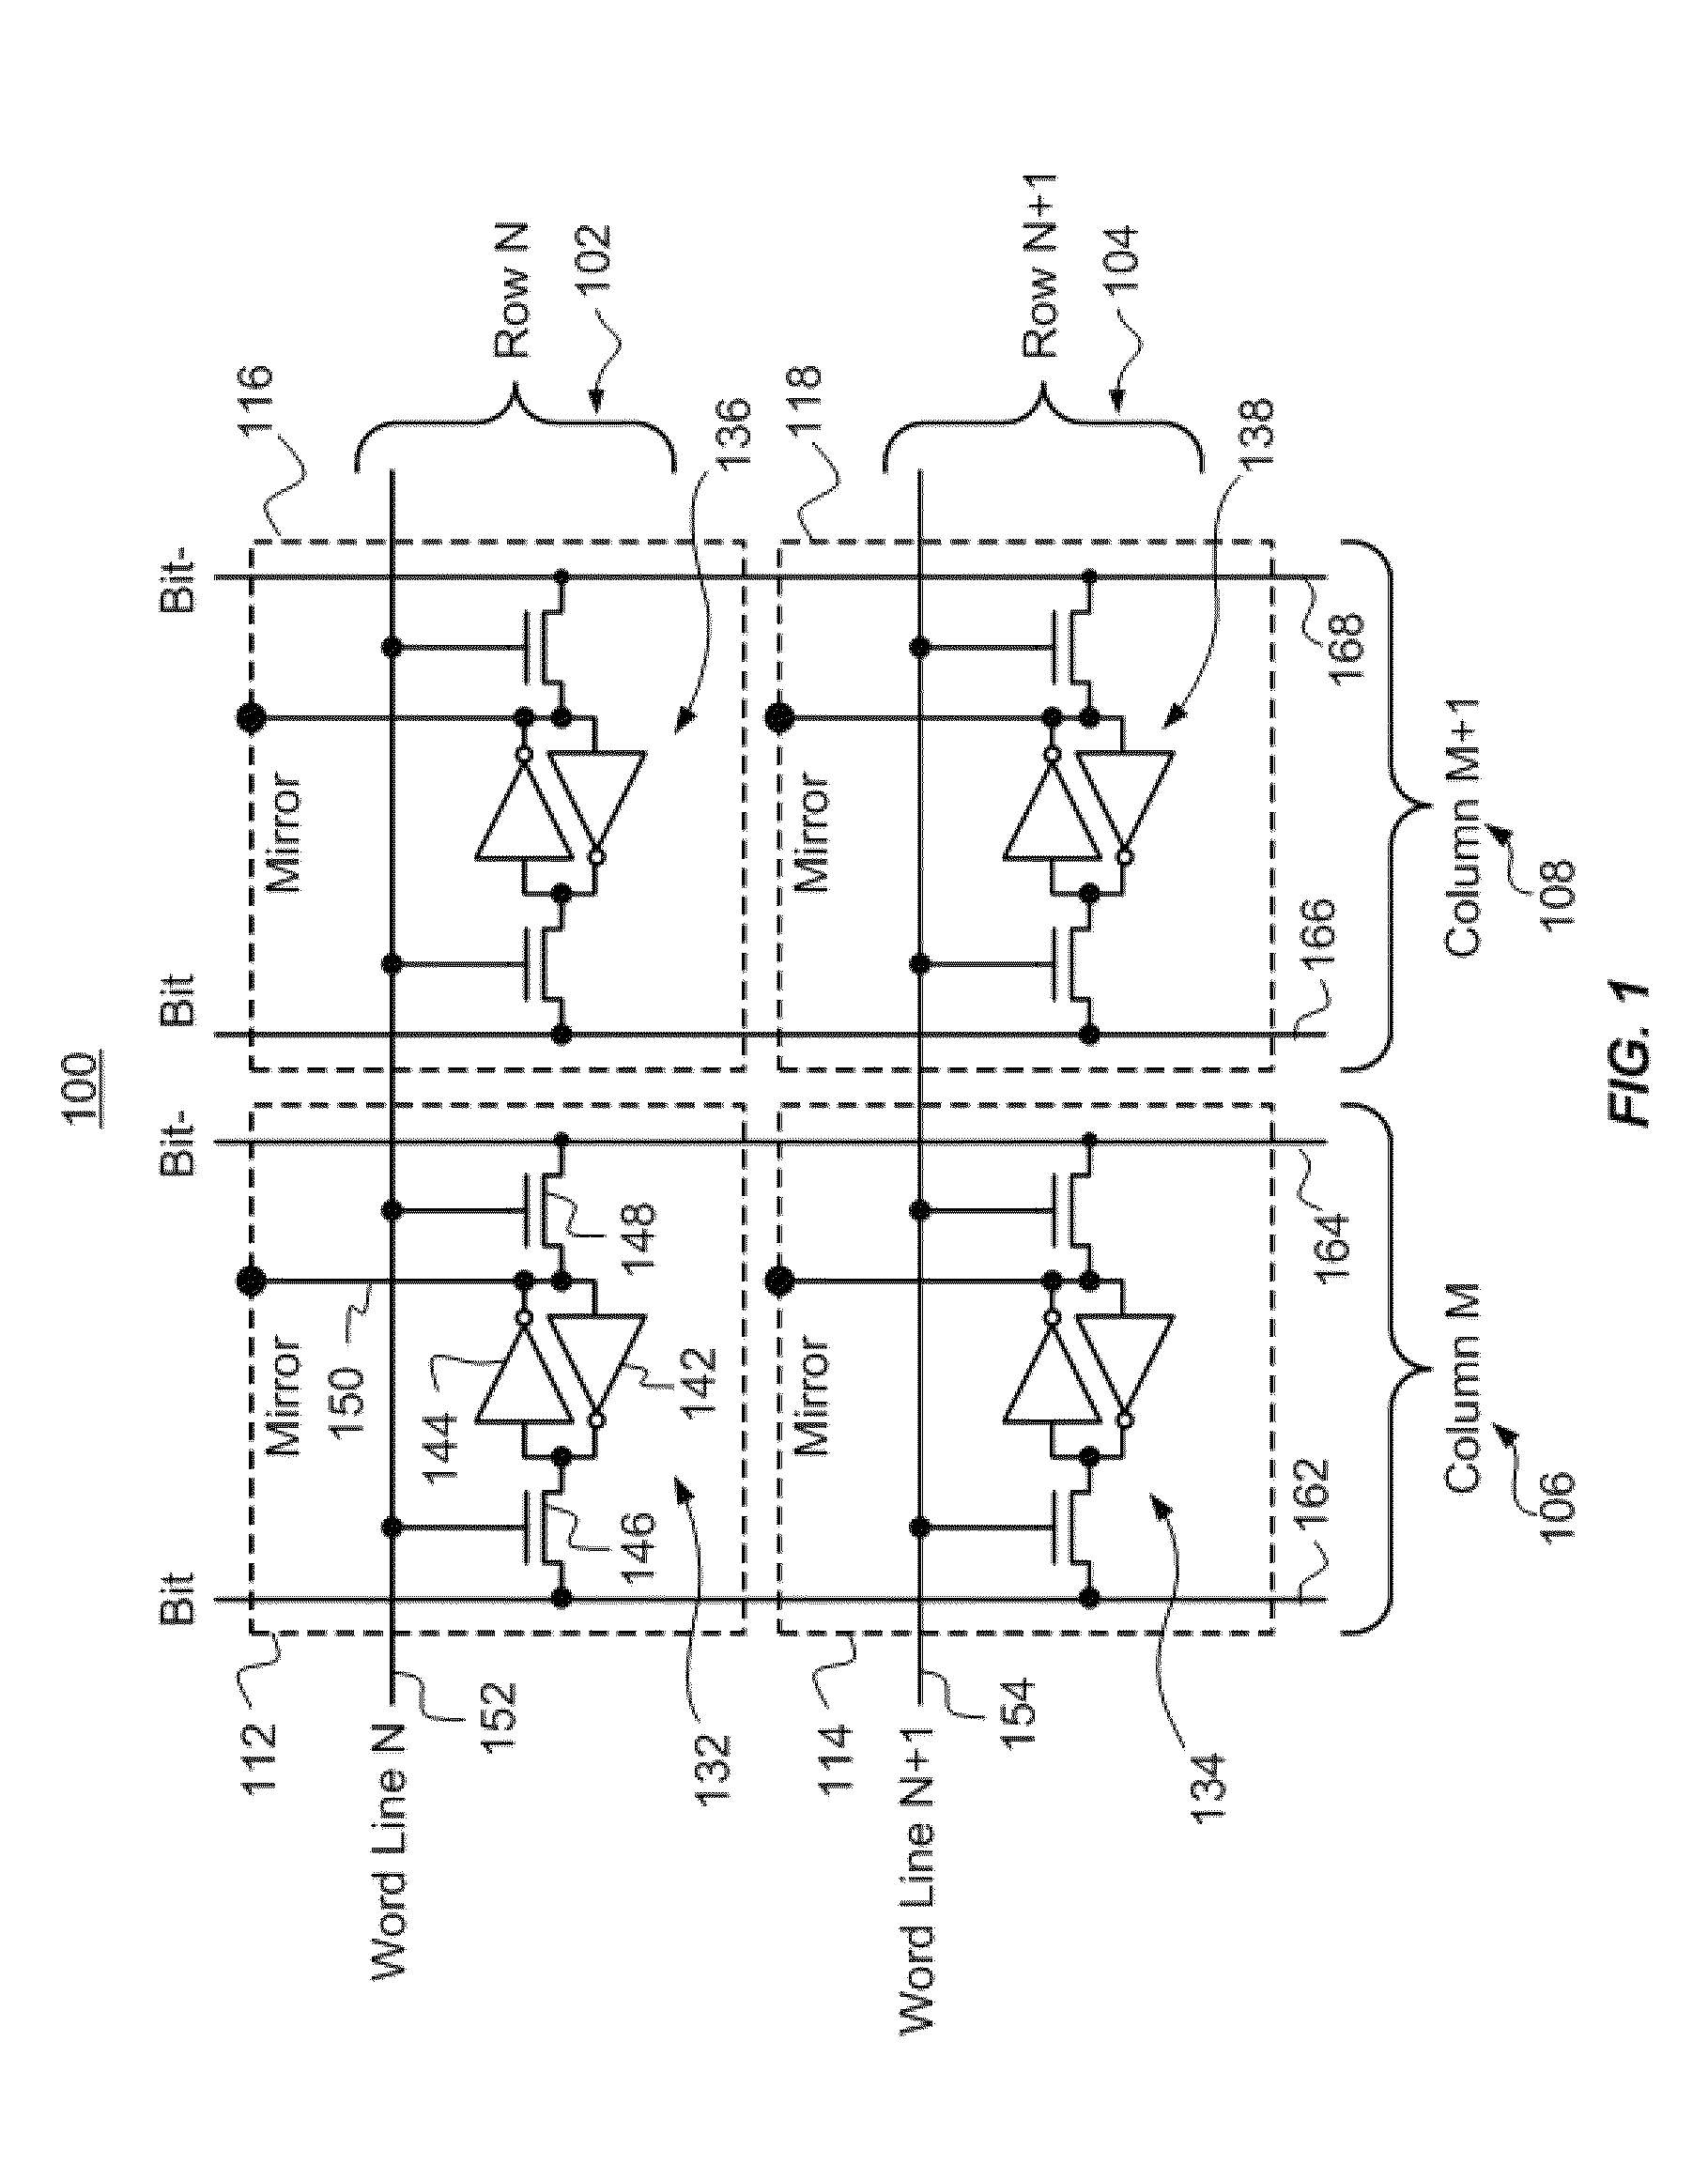 Spatial light modulator with masking-comparators